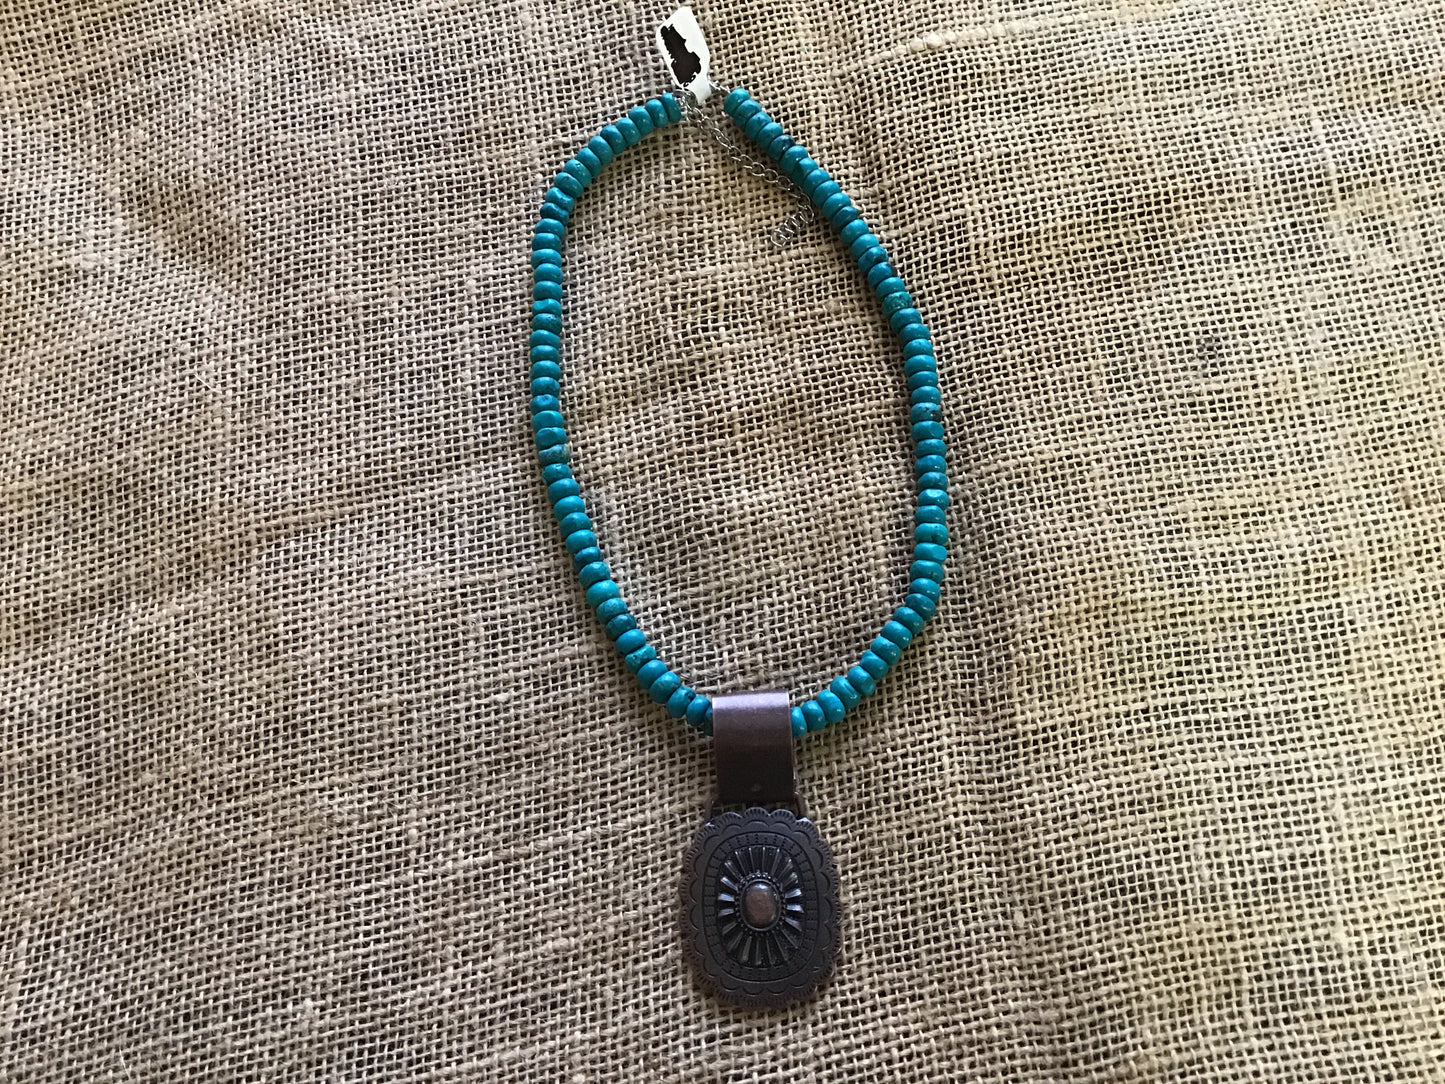 Choker necklace, turquoise and brown stone with concho accent.